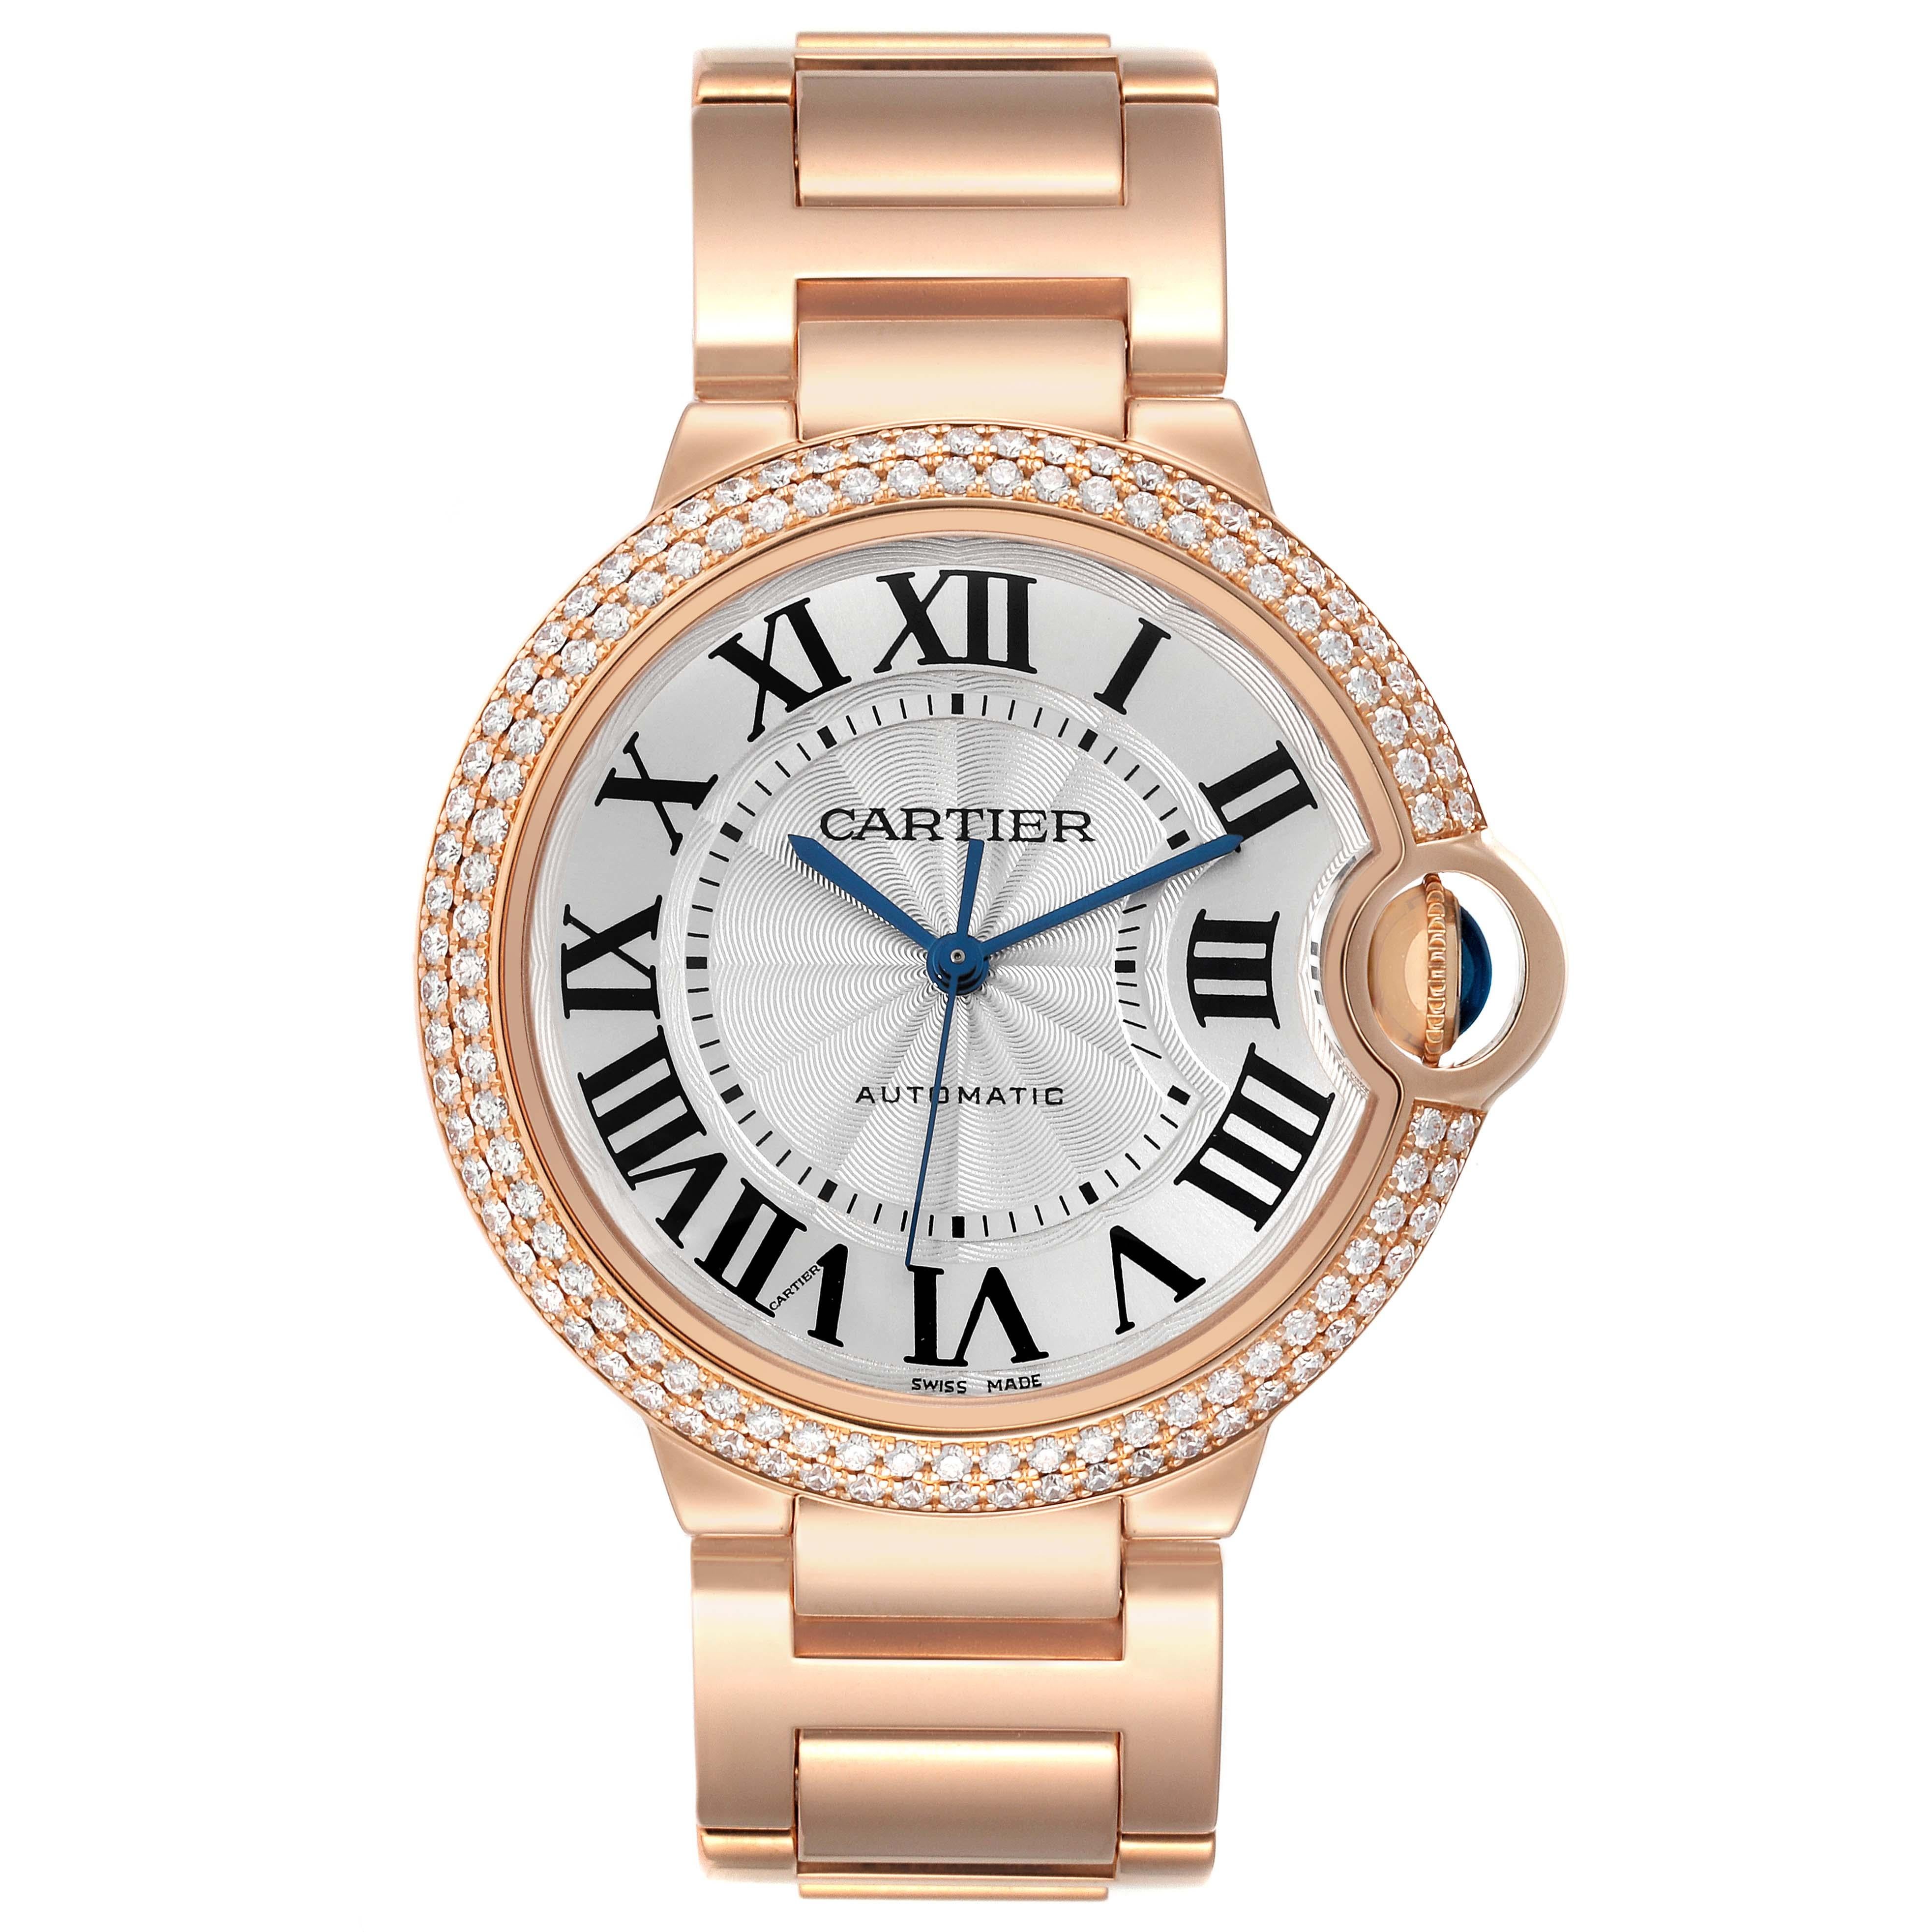 Cartier Ballon Bleu 36mm Automatic Rose Gold Diamond Mens Watch WE9005Z3. Automatic self-winding movement. 18K rose gold case 36.6 mm in diameter, 12.05 mm thick. Fluted crown set with the blue sapphire cabochon. 18K rose gold original Cartier